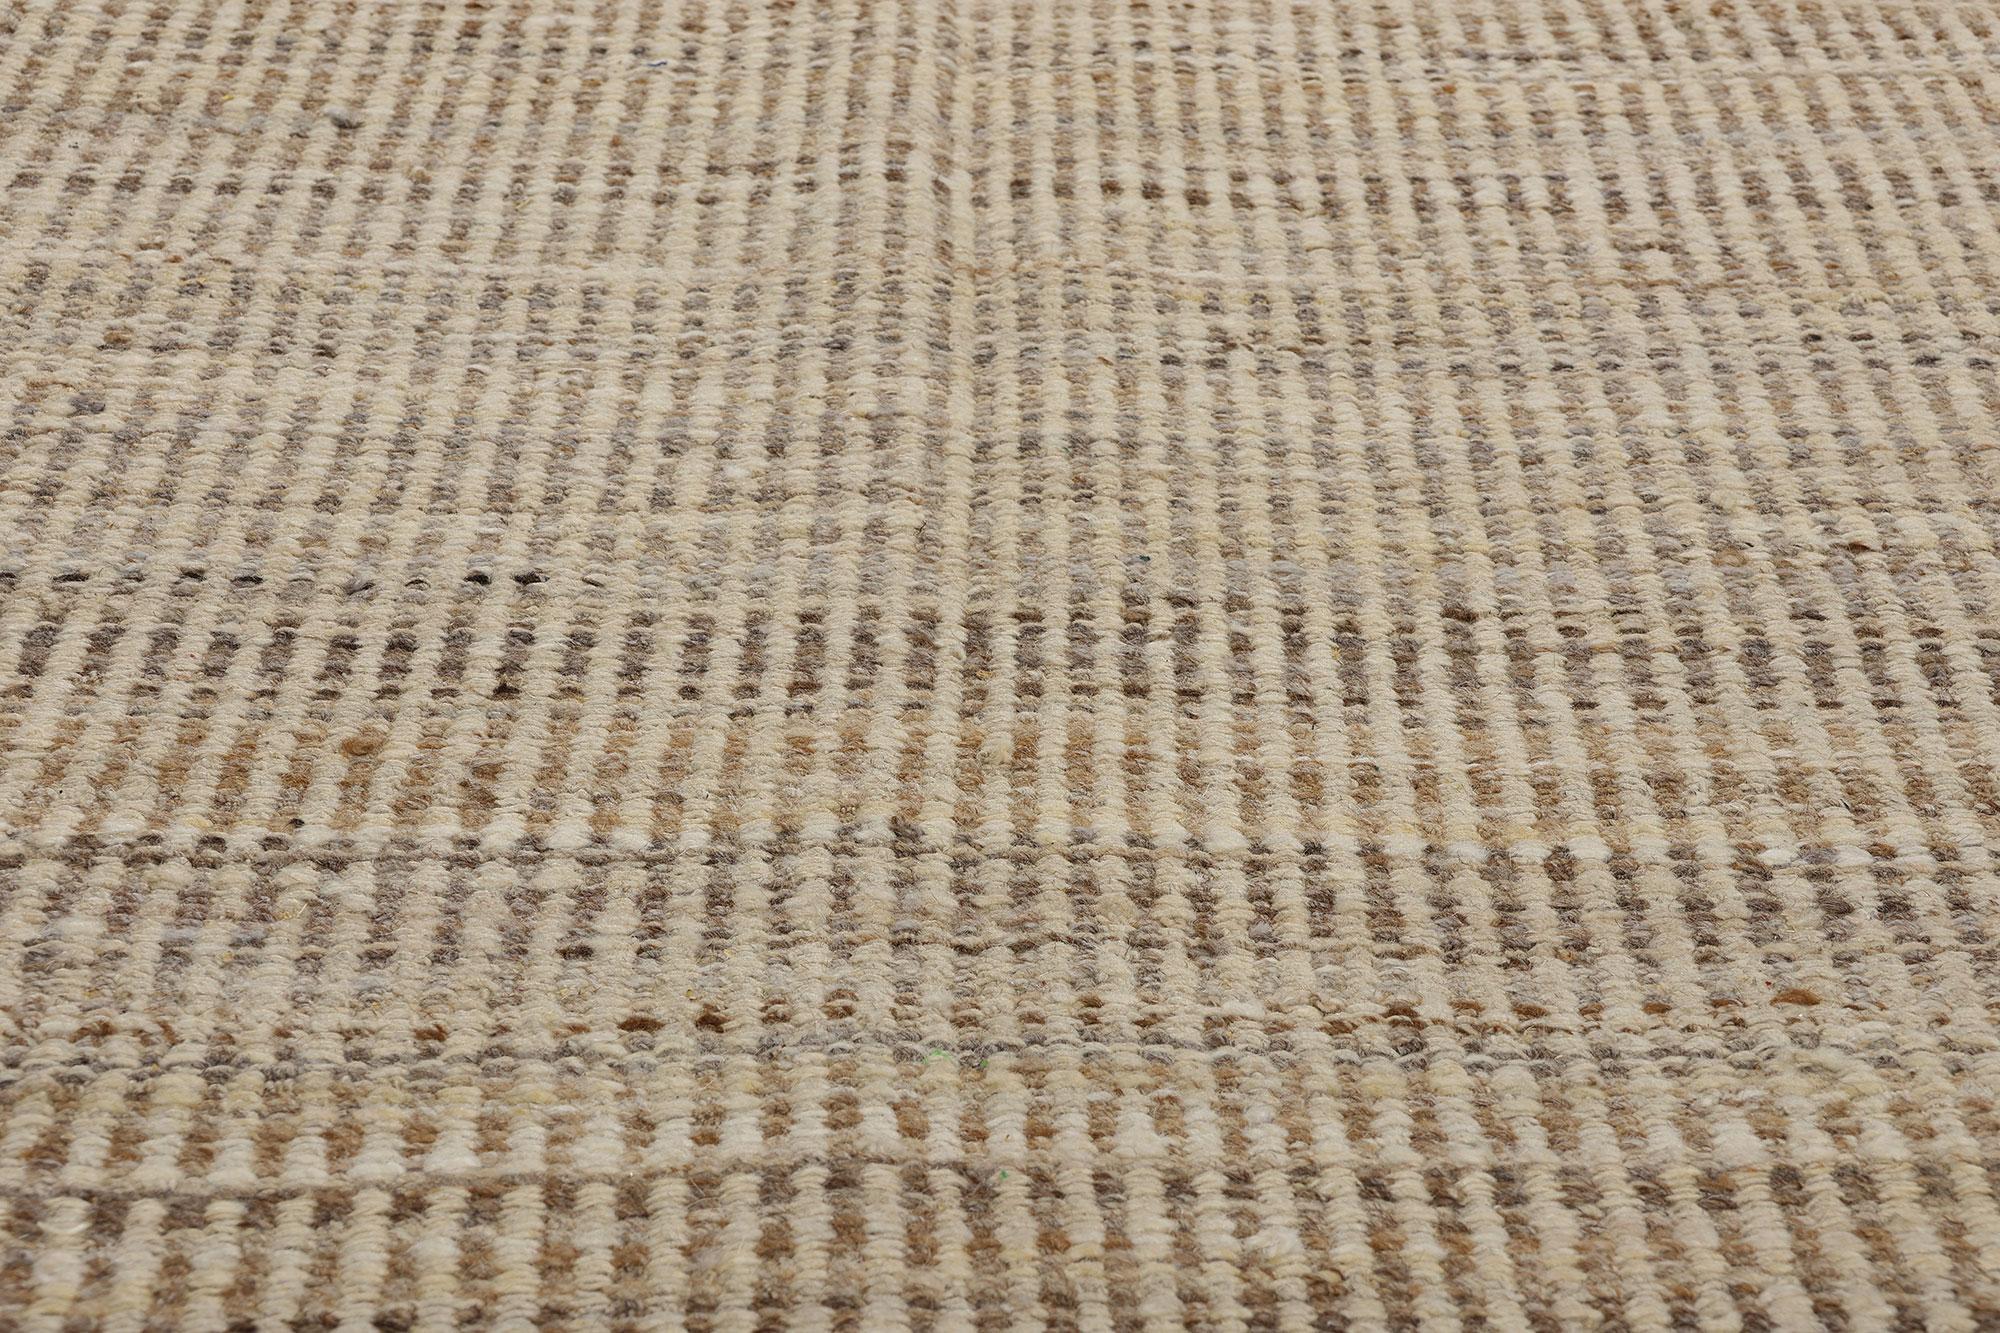 Hand-Woven Earth-Tone Japandi Kilim Area Rug, Modern Serenity Meets Zen Tranquility For Sale